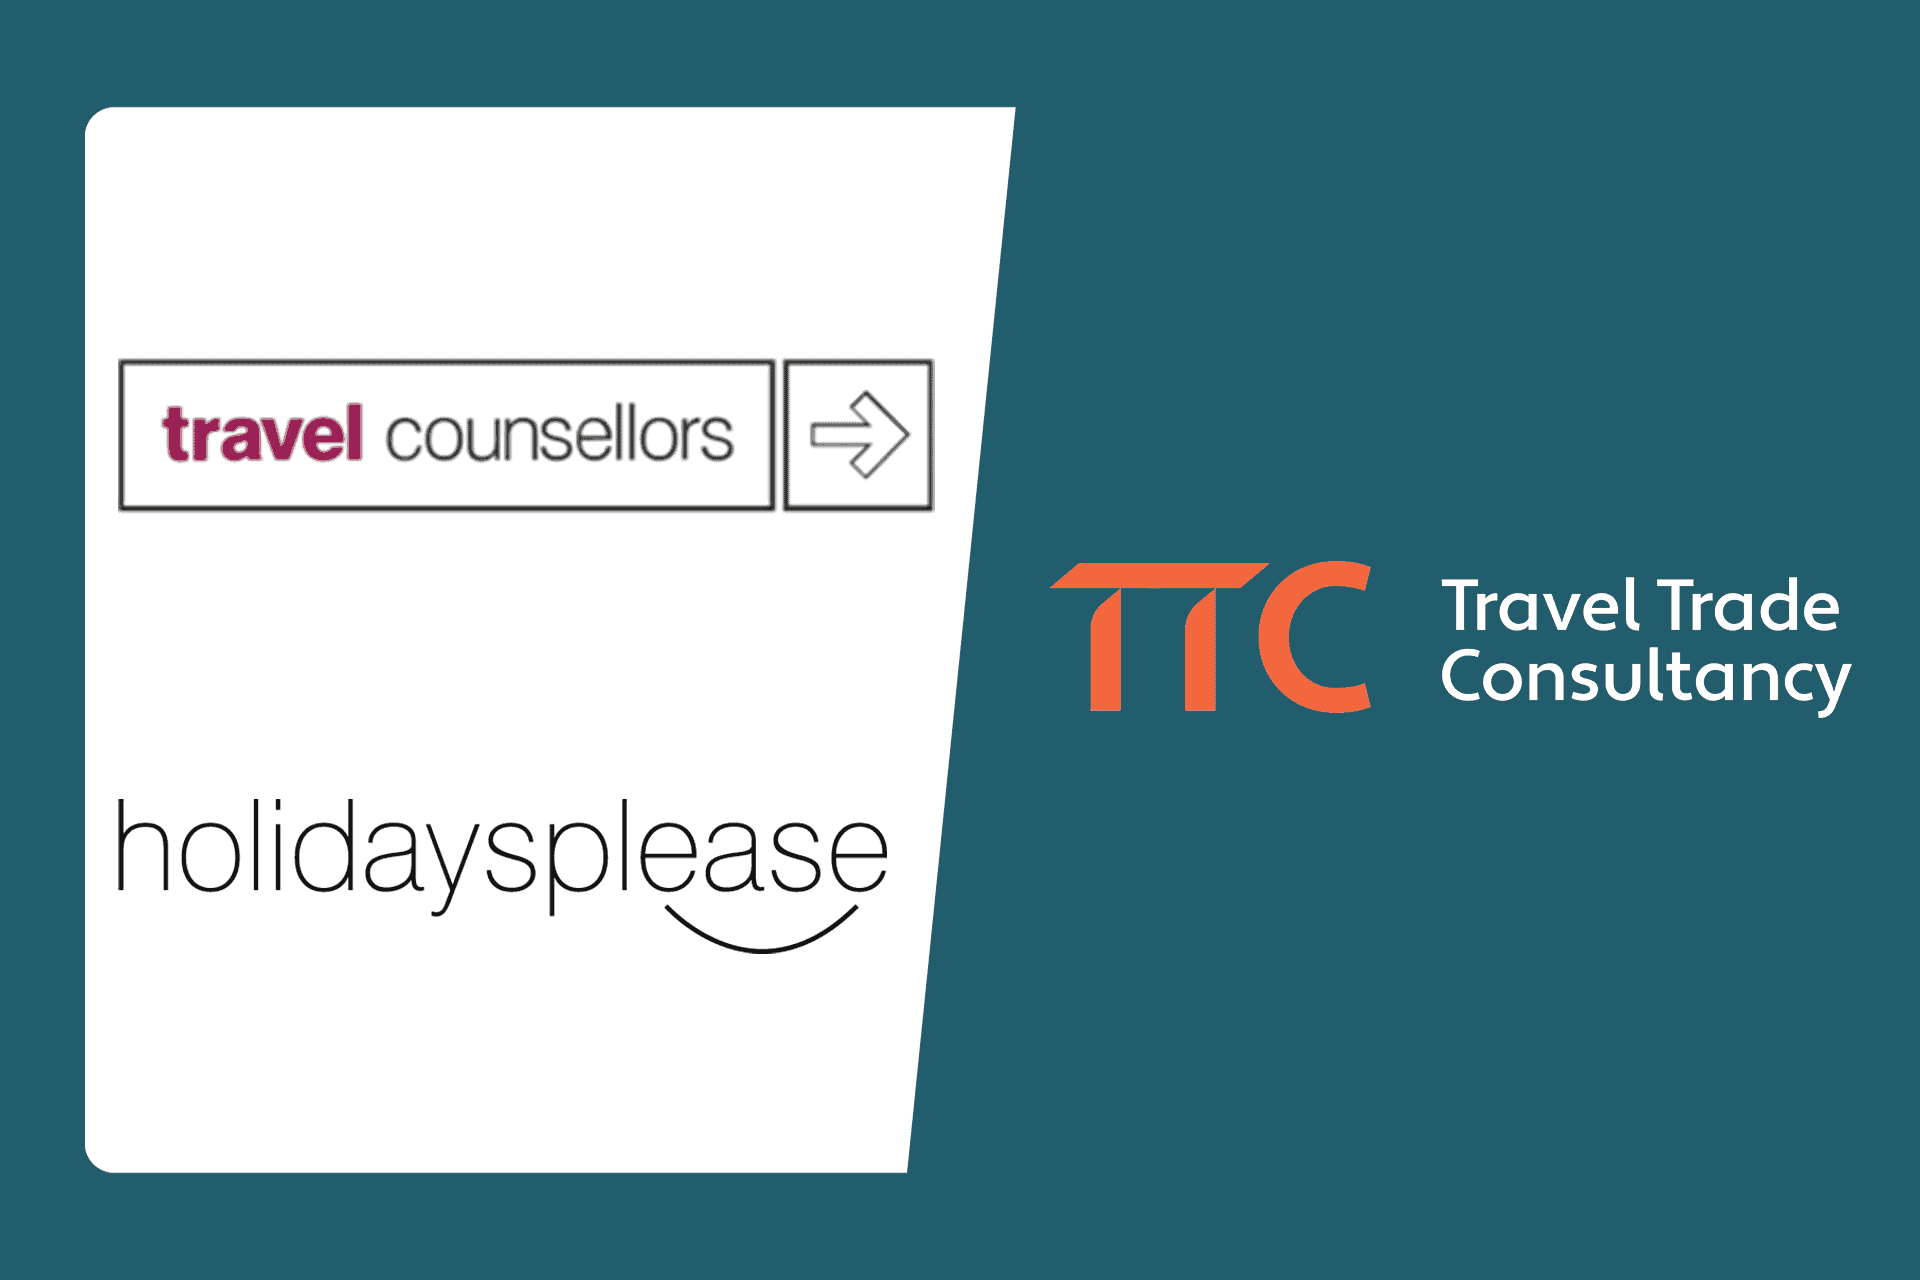 travel counsellors acquisition